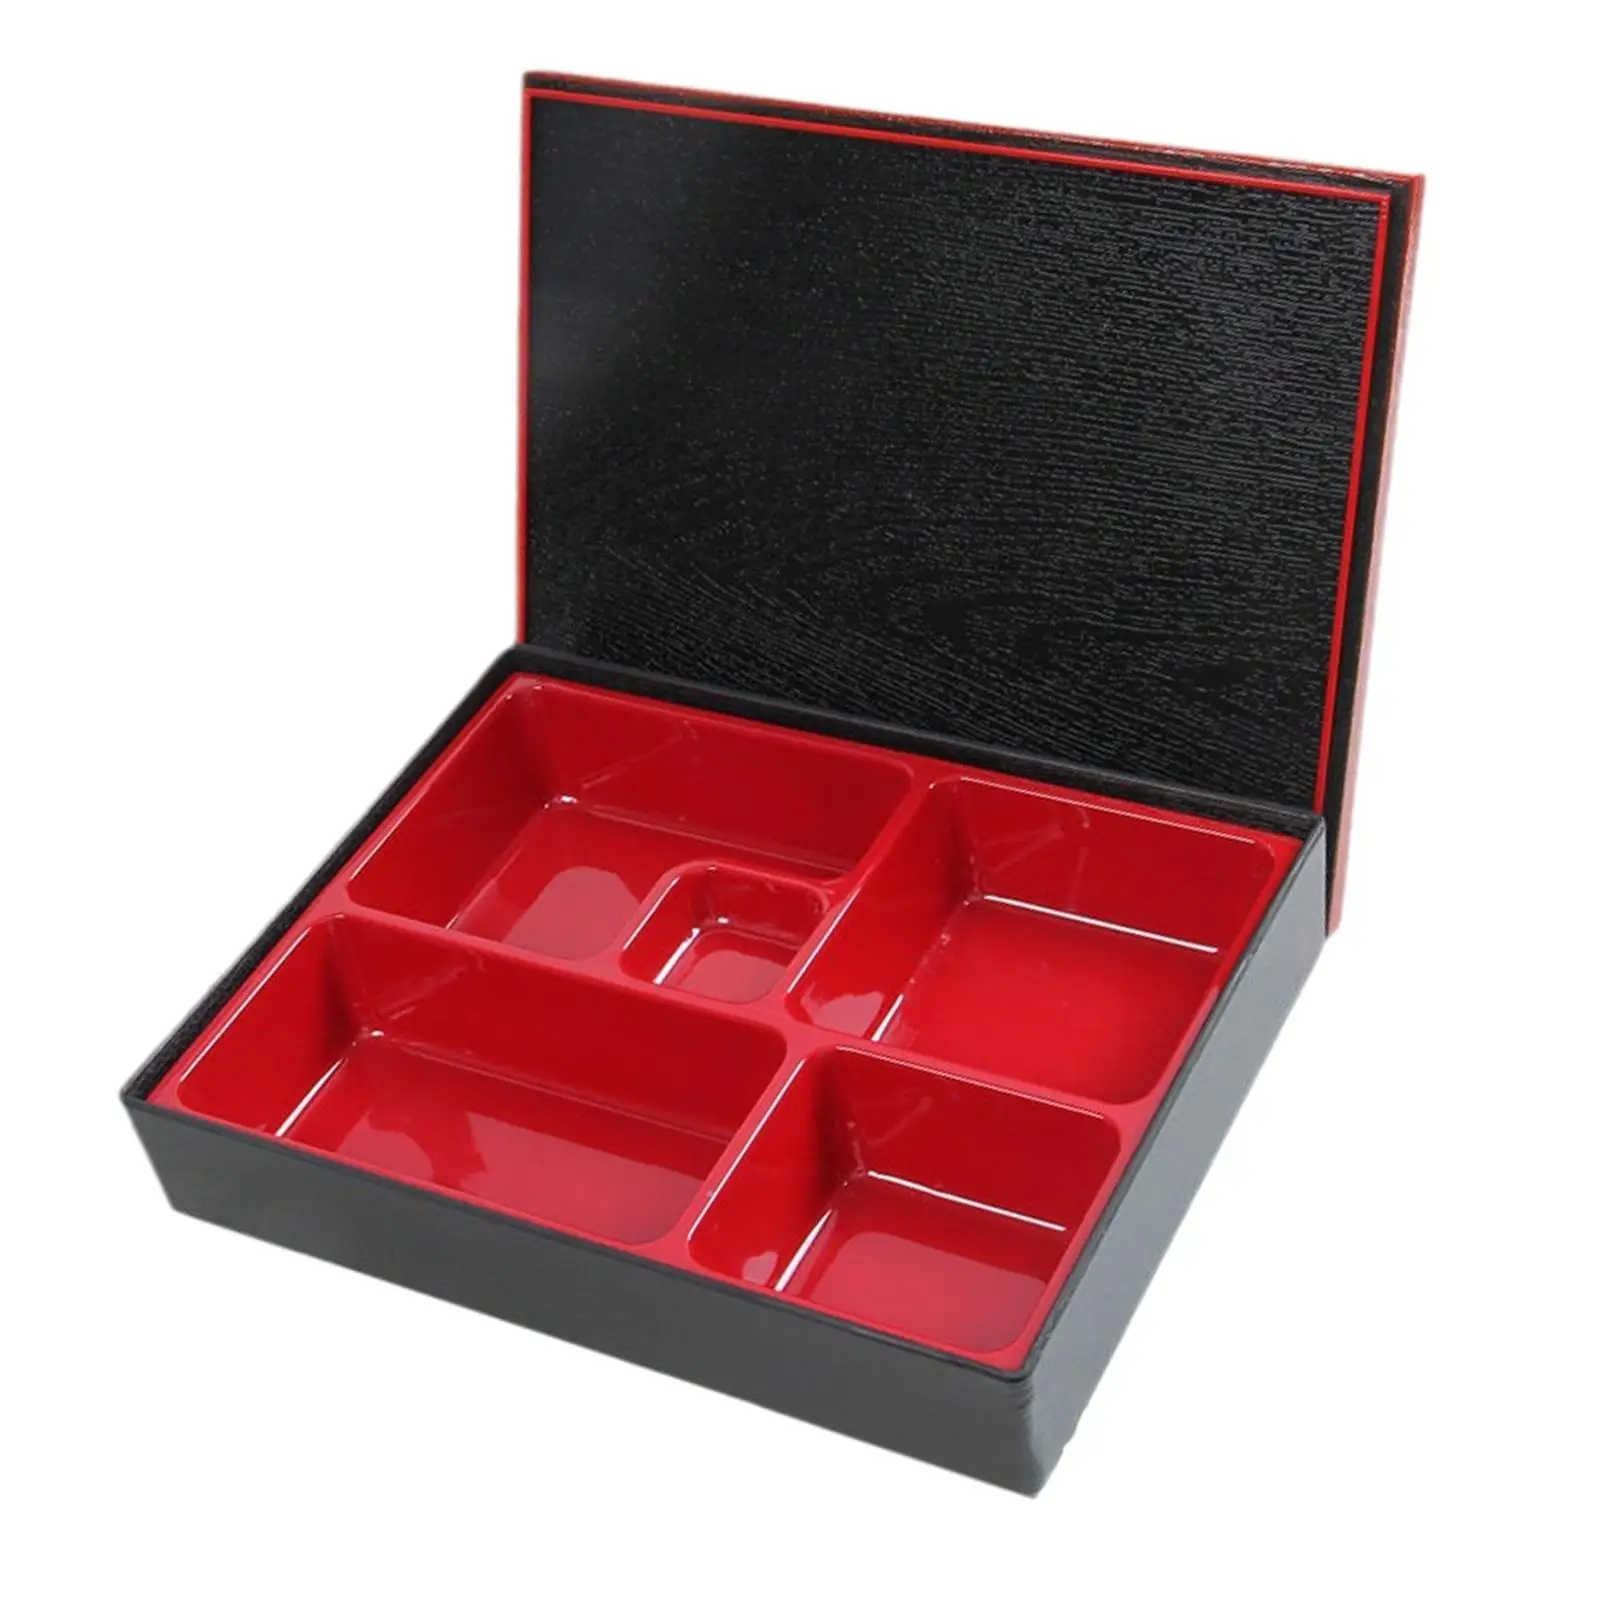 Japanese Bento Box with Lid 5 Compartments Snack Serving Tray Lunch Box for Office Business Picnic Sushi, Rice, Sauce Restaurant